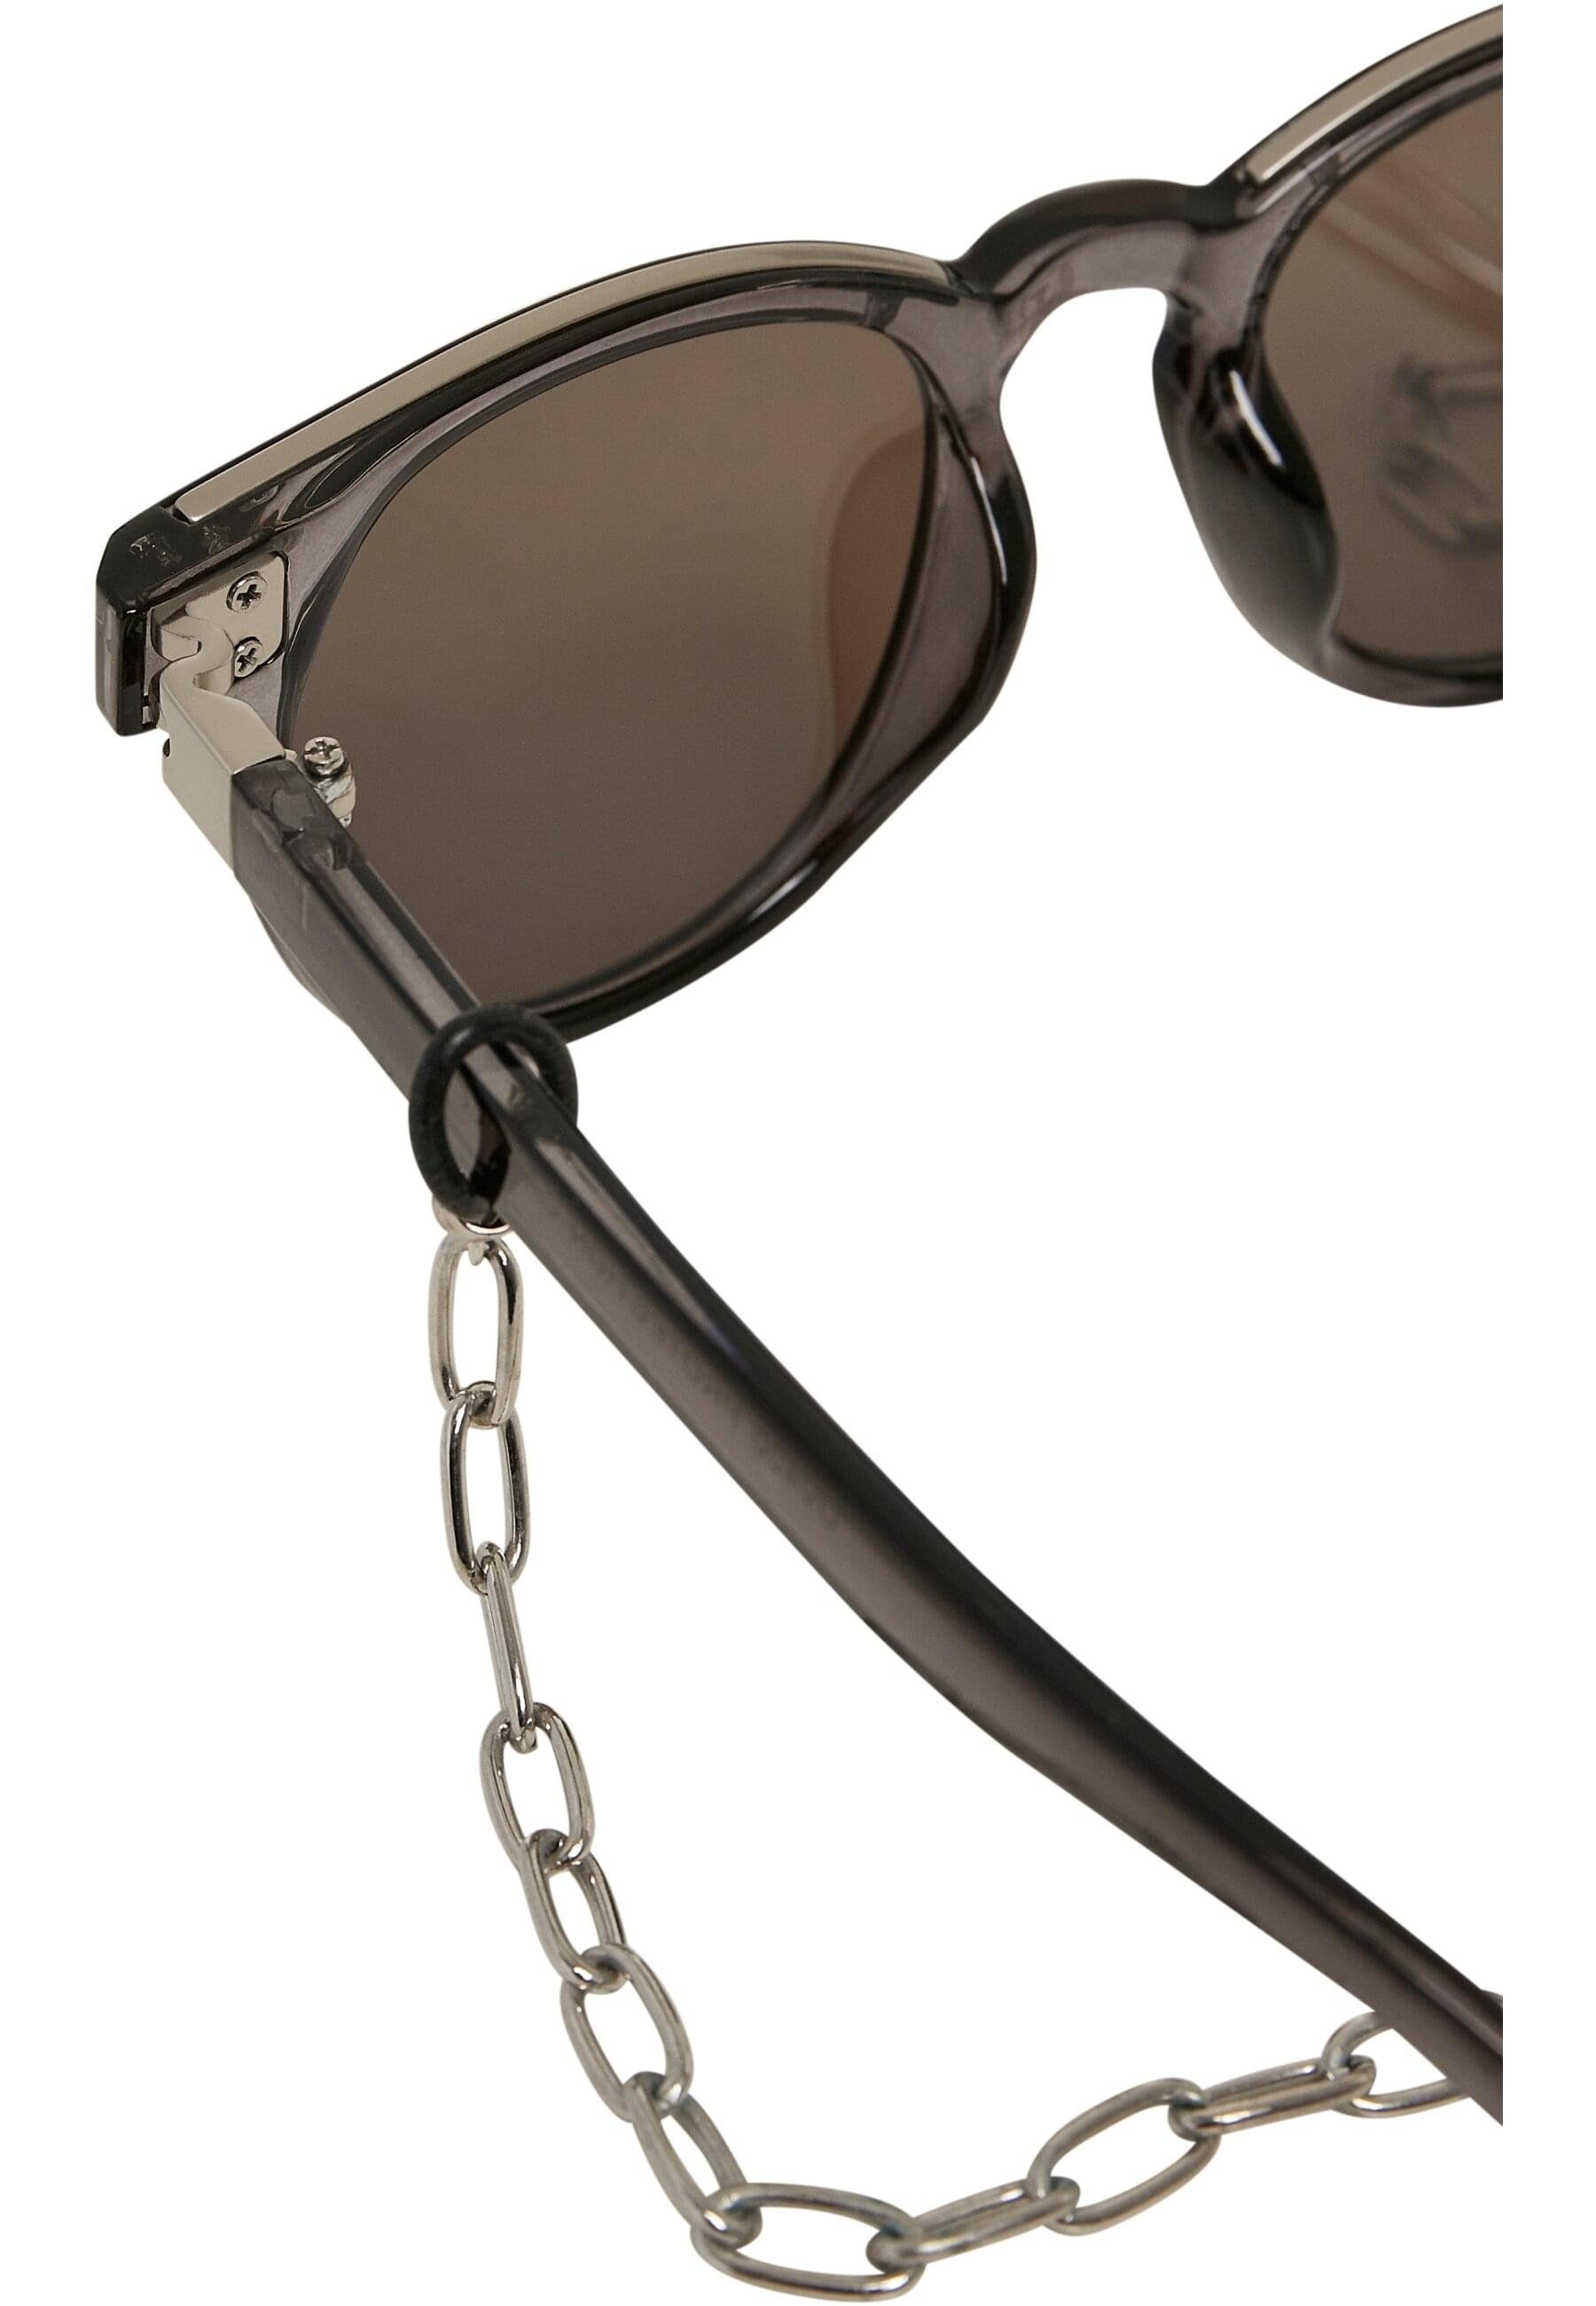 URBAN CLASSICS Sonnenbrille Unisex Italy with chain grey/silver/silver Sunglasses